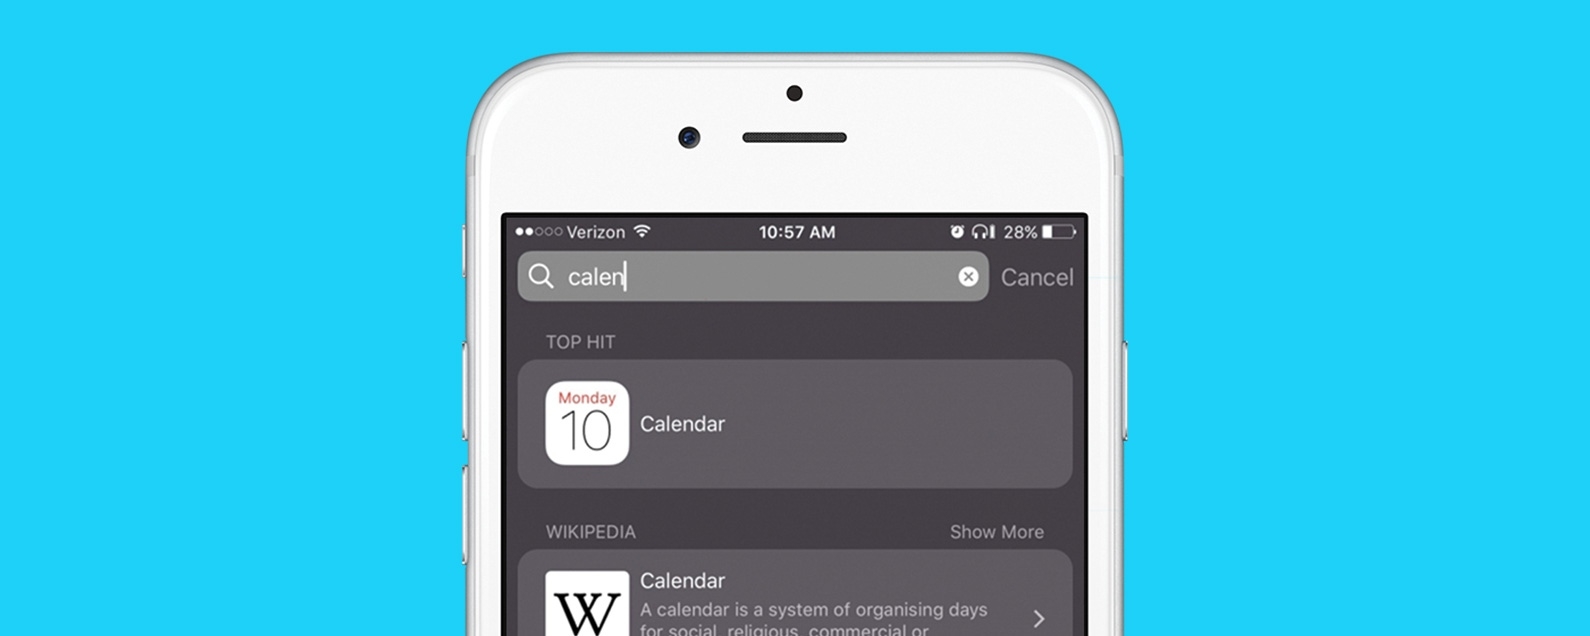 Iphone Calendar Disappeared? How To Get It Back On Your Iphone Calendar Icon For Iphone